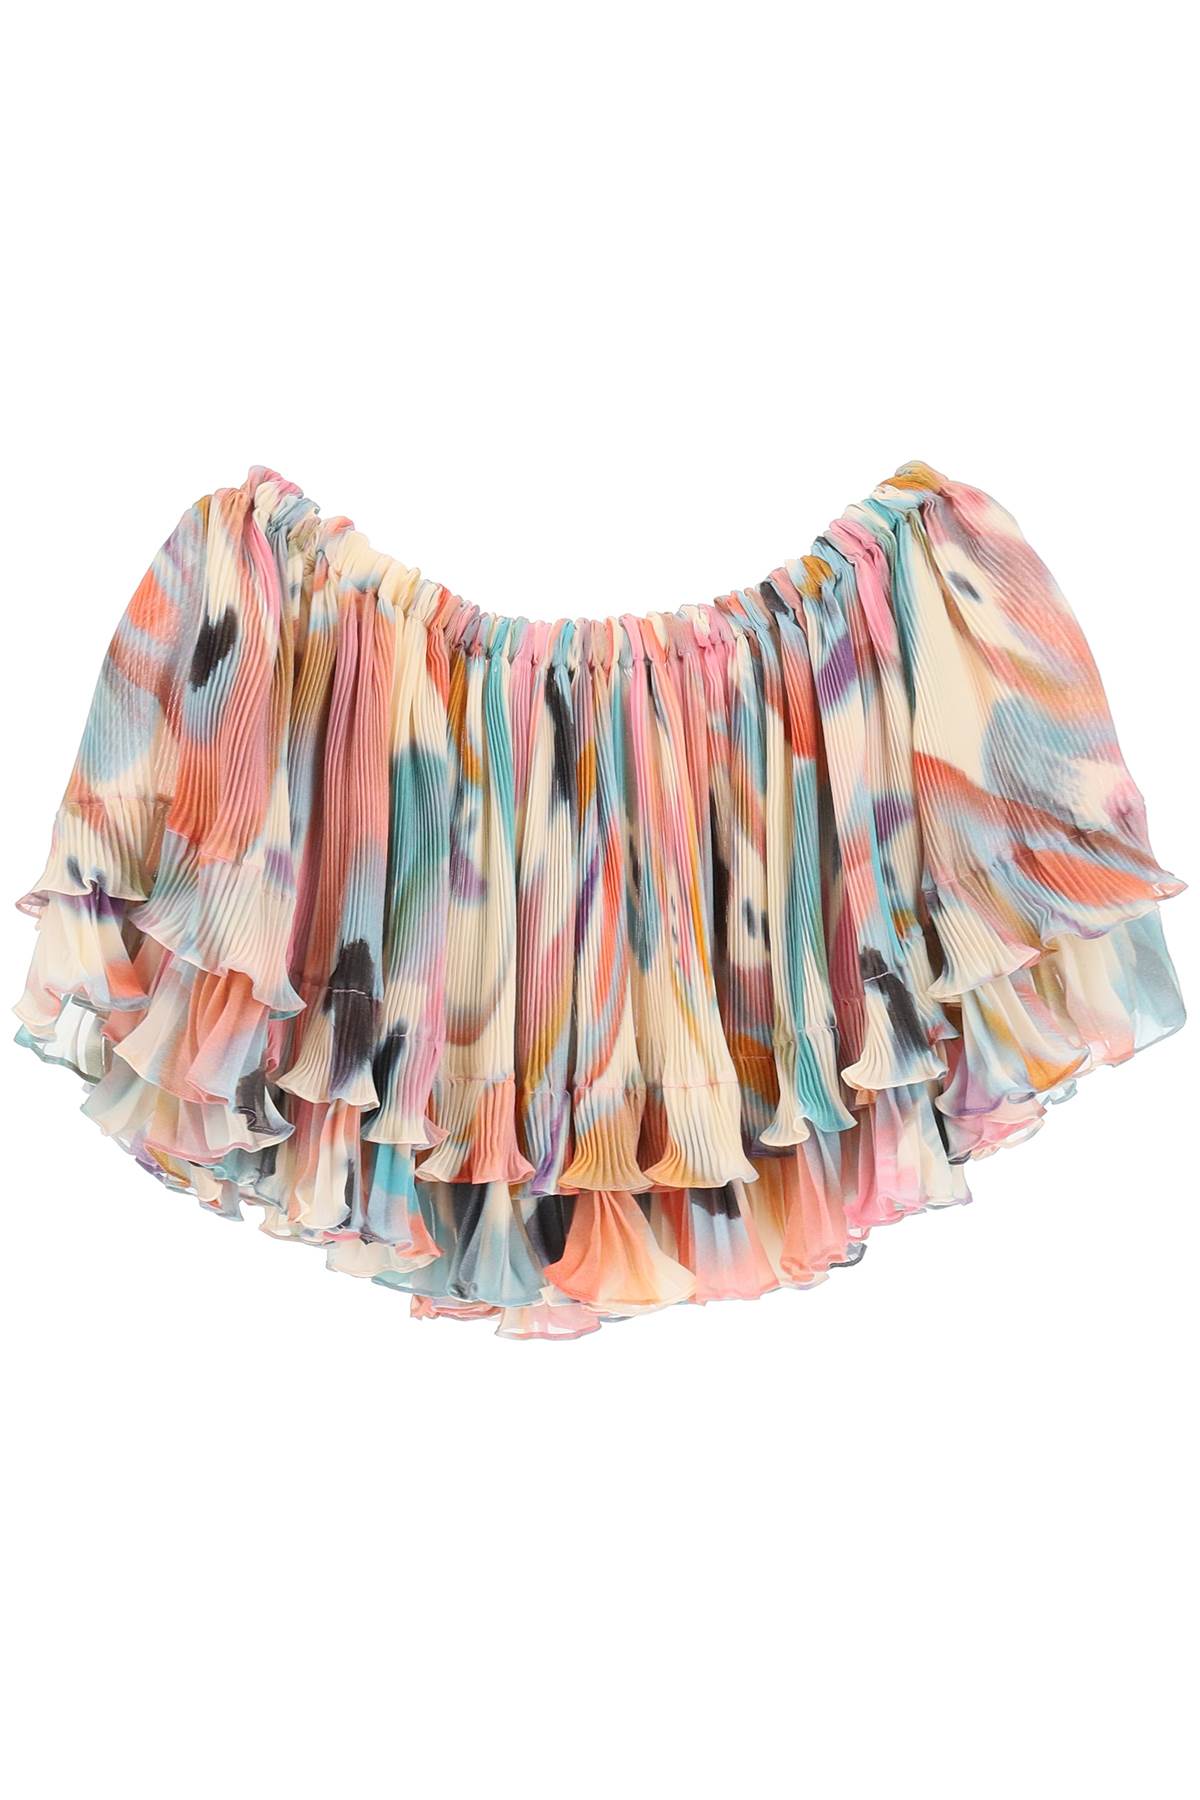 ETRO BUTTERFLY WING PRINT OFF-THE-SHOULDER CROP TOP